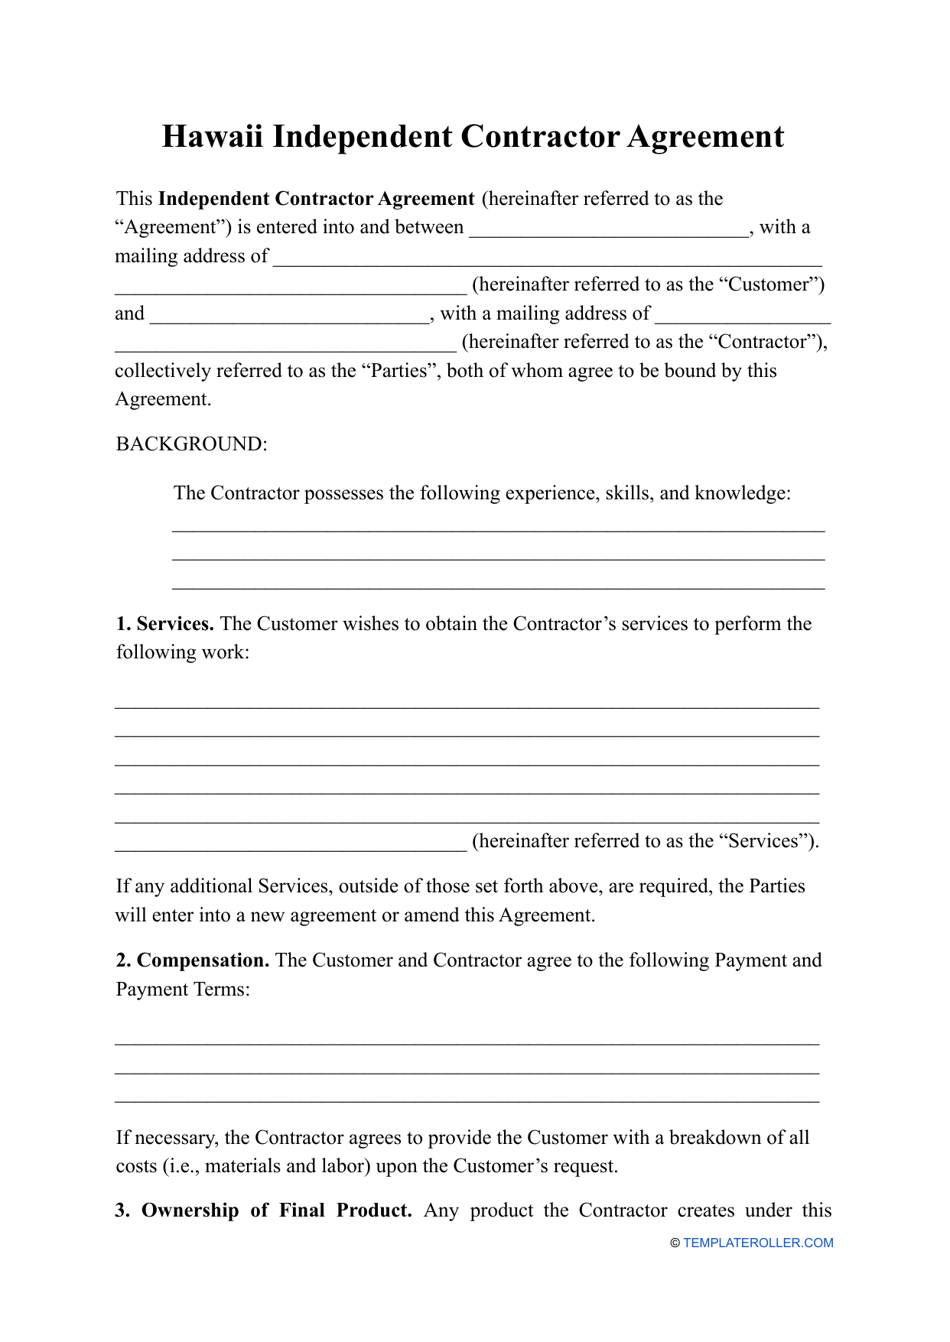 Independent Contractor Agreement Template - Hawaii, Page 1